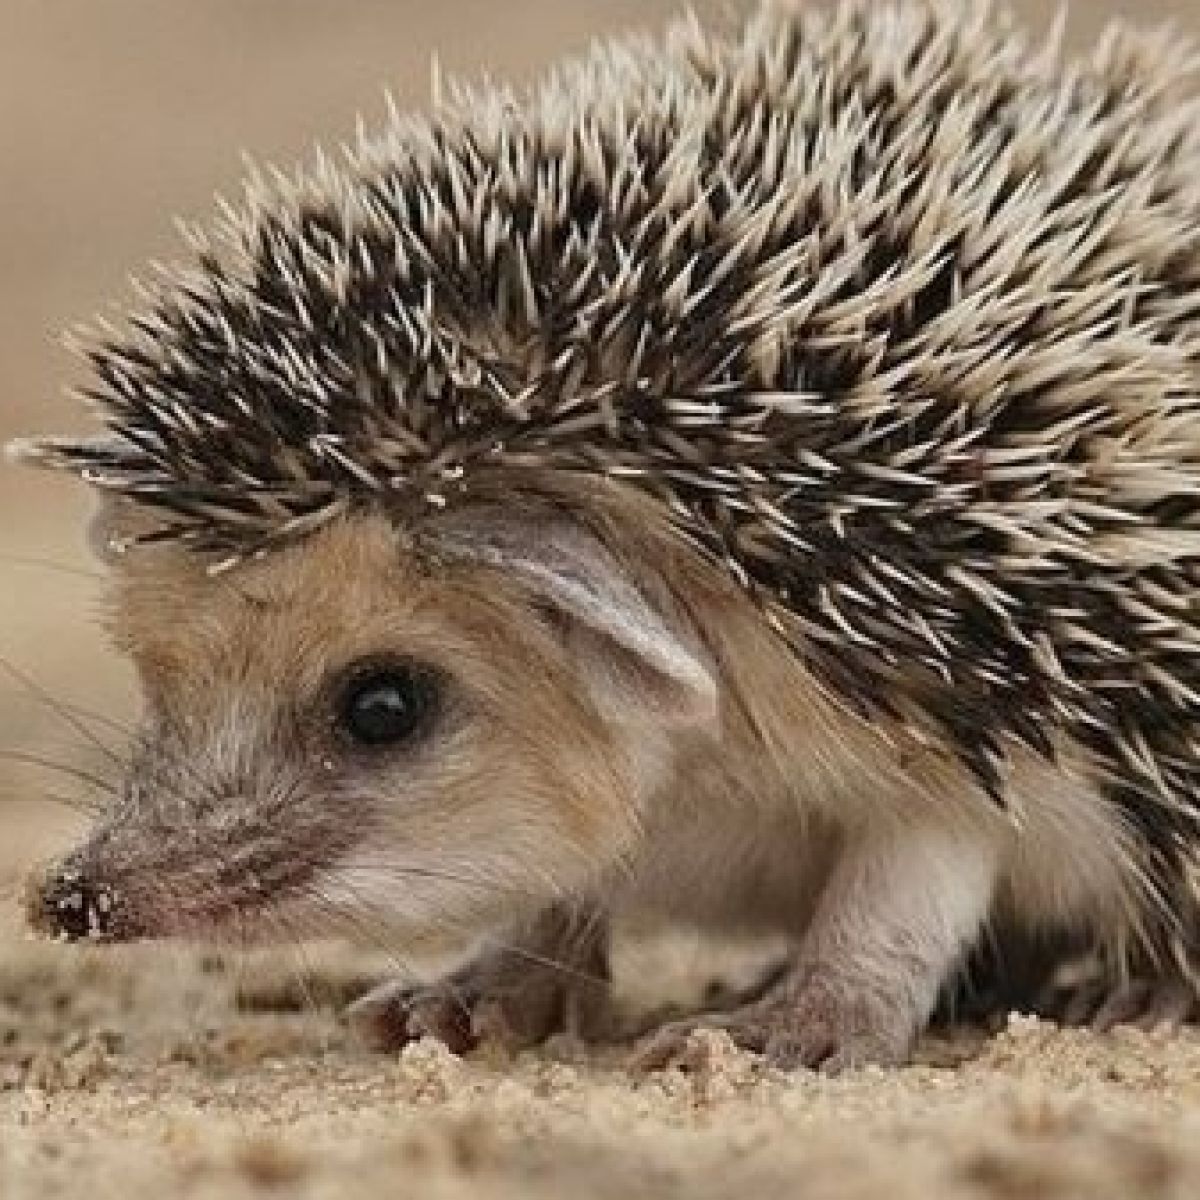 What is a female hedgehog called?